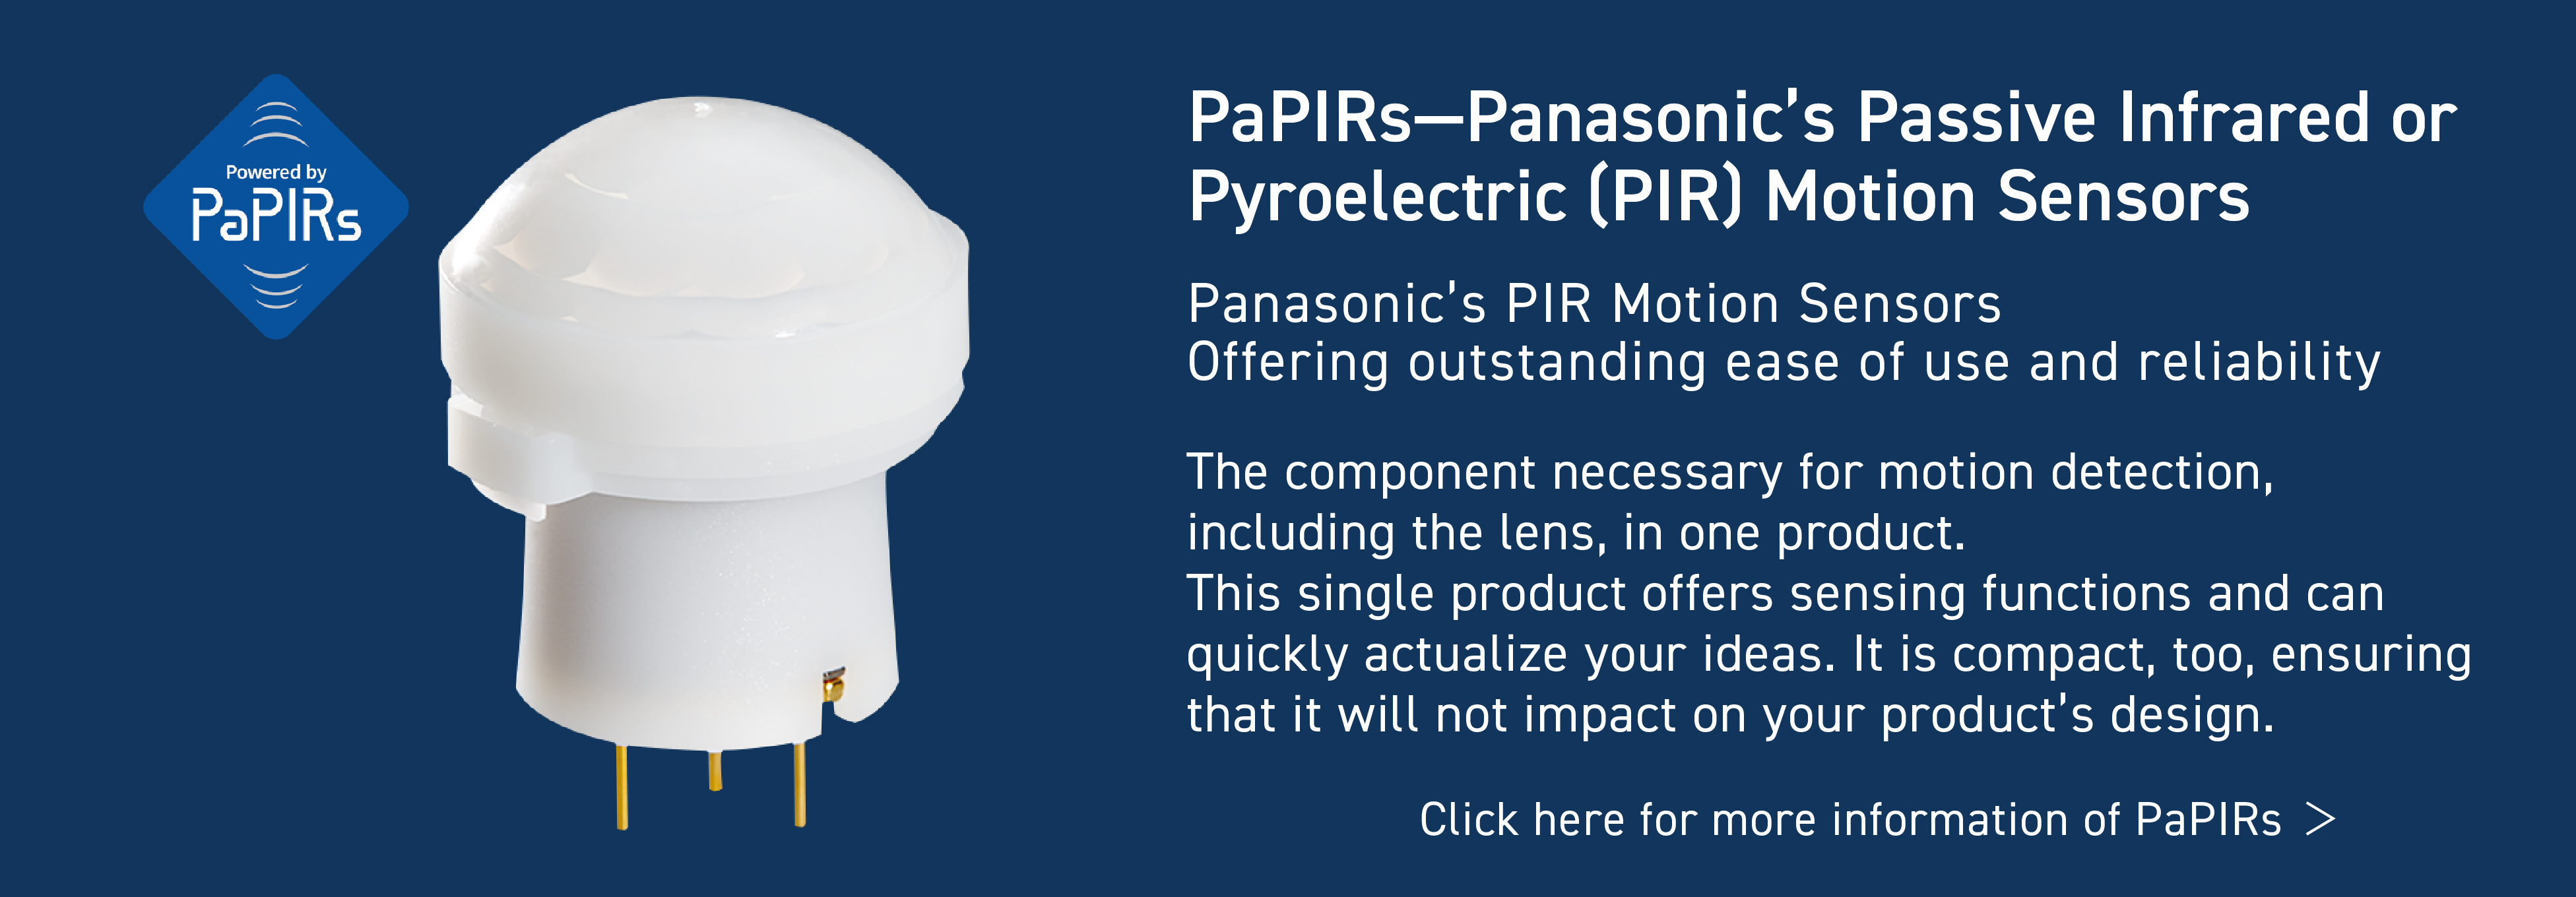 PaPIRs-Panasonic's Passive Infrared or Pyroelectric (PIR)  Motion Sensors, Panasonic's PIR  Motion Sensors Offering outstanding ease of use and reliability